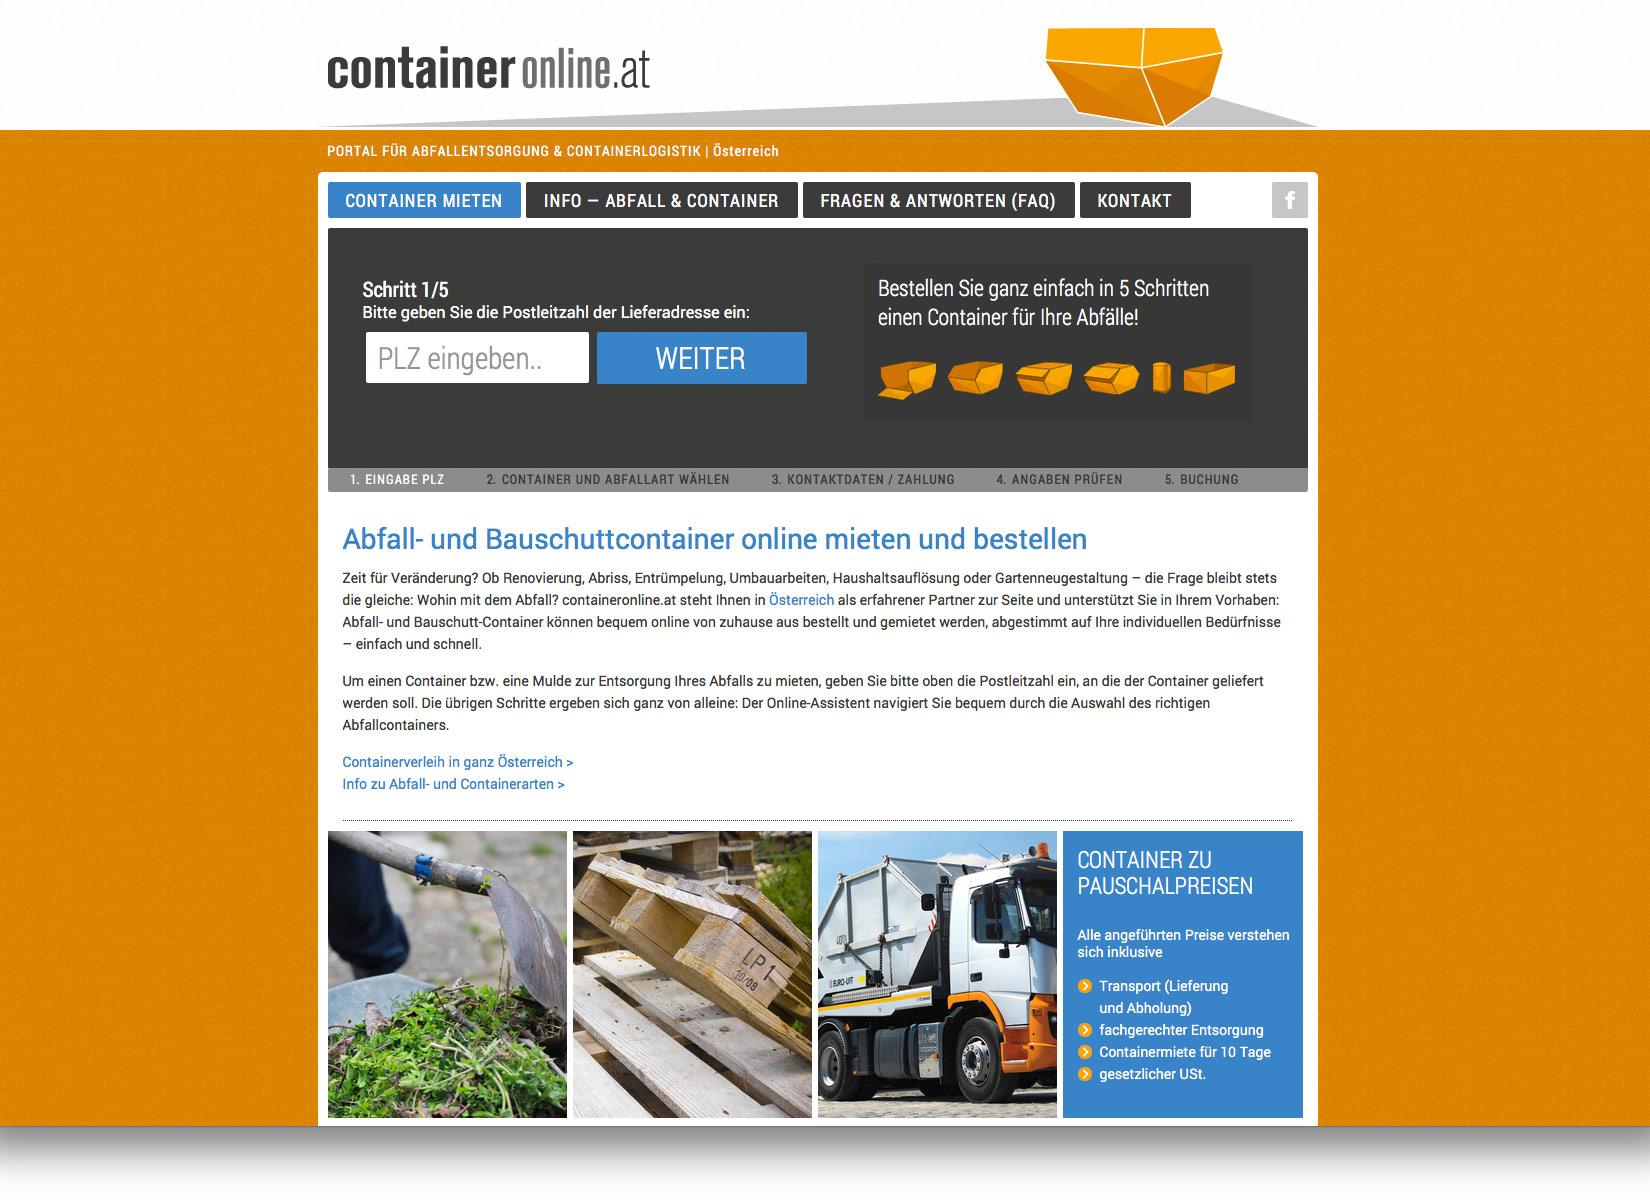 containeronline.at – Website